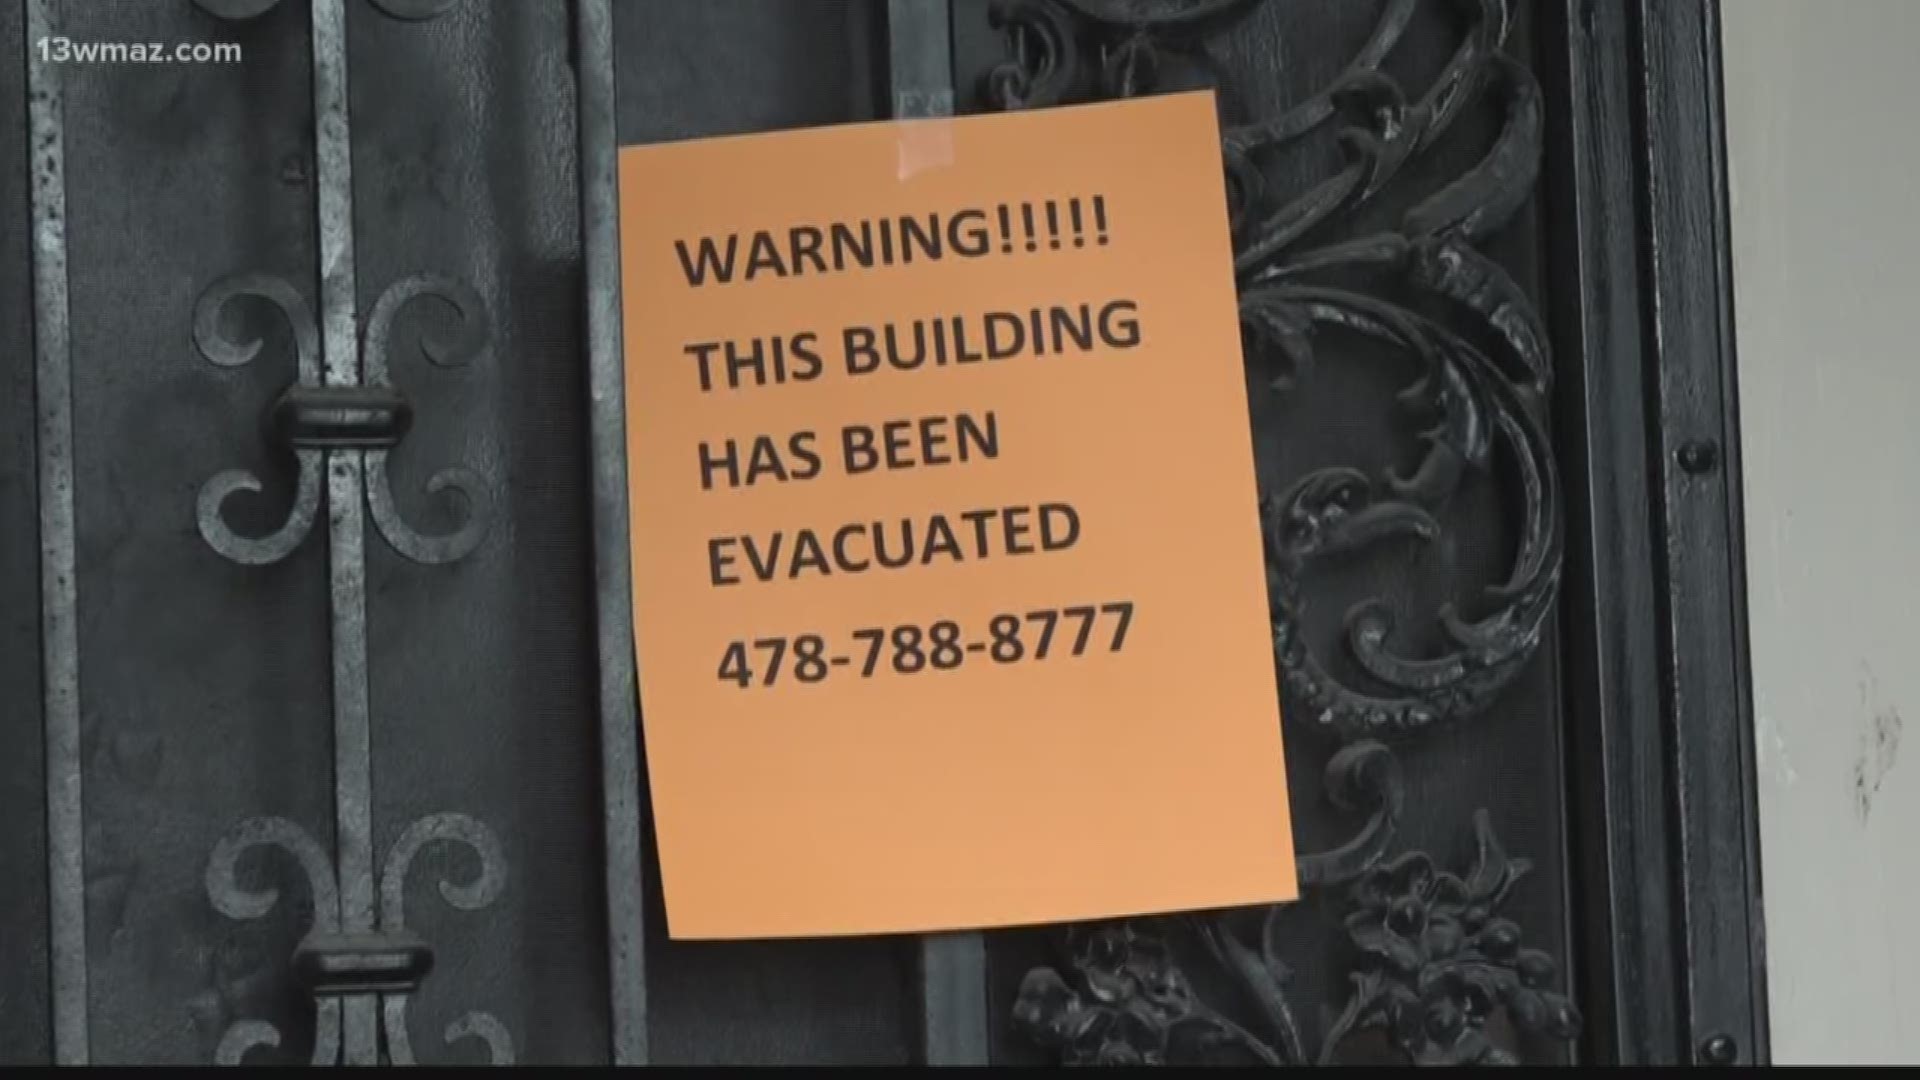 70 residents from Crystal Lake Apartments in Macon were forced to evacuate from their homes.